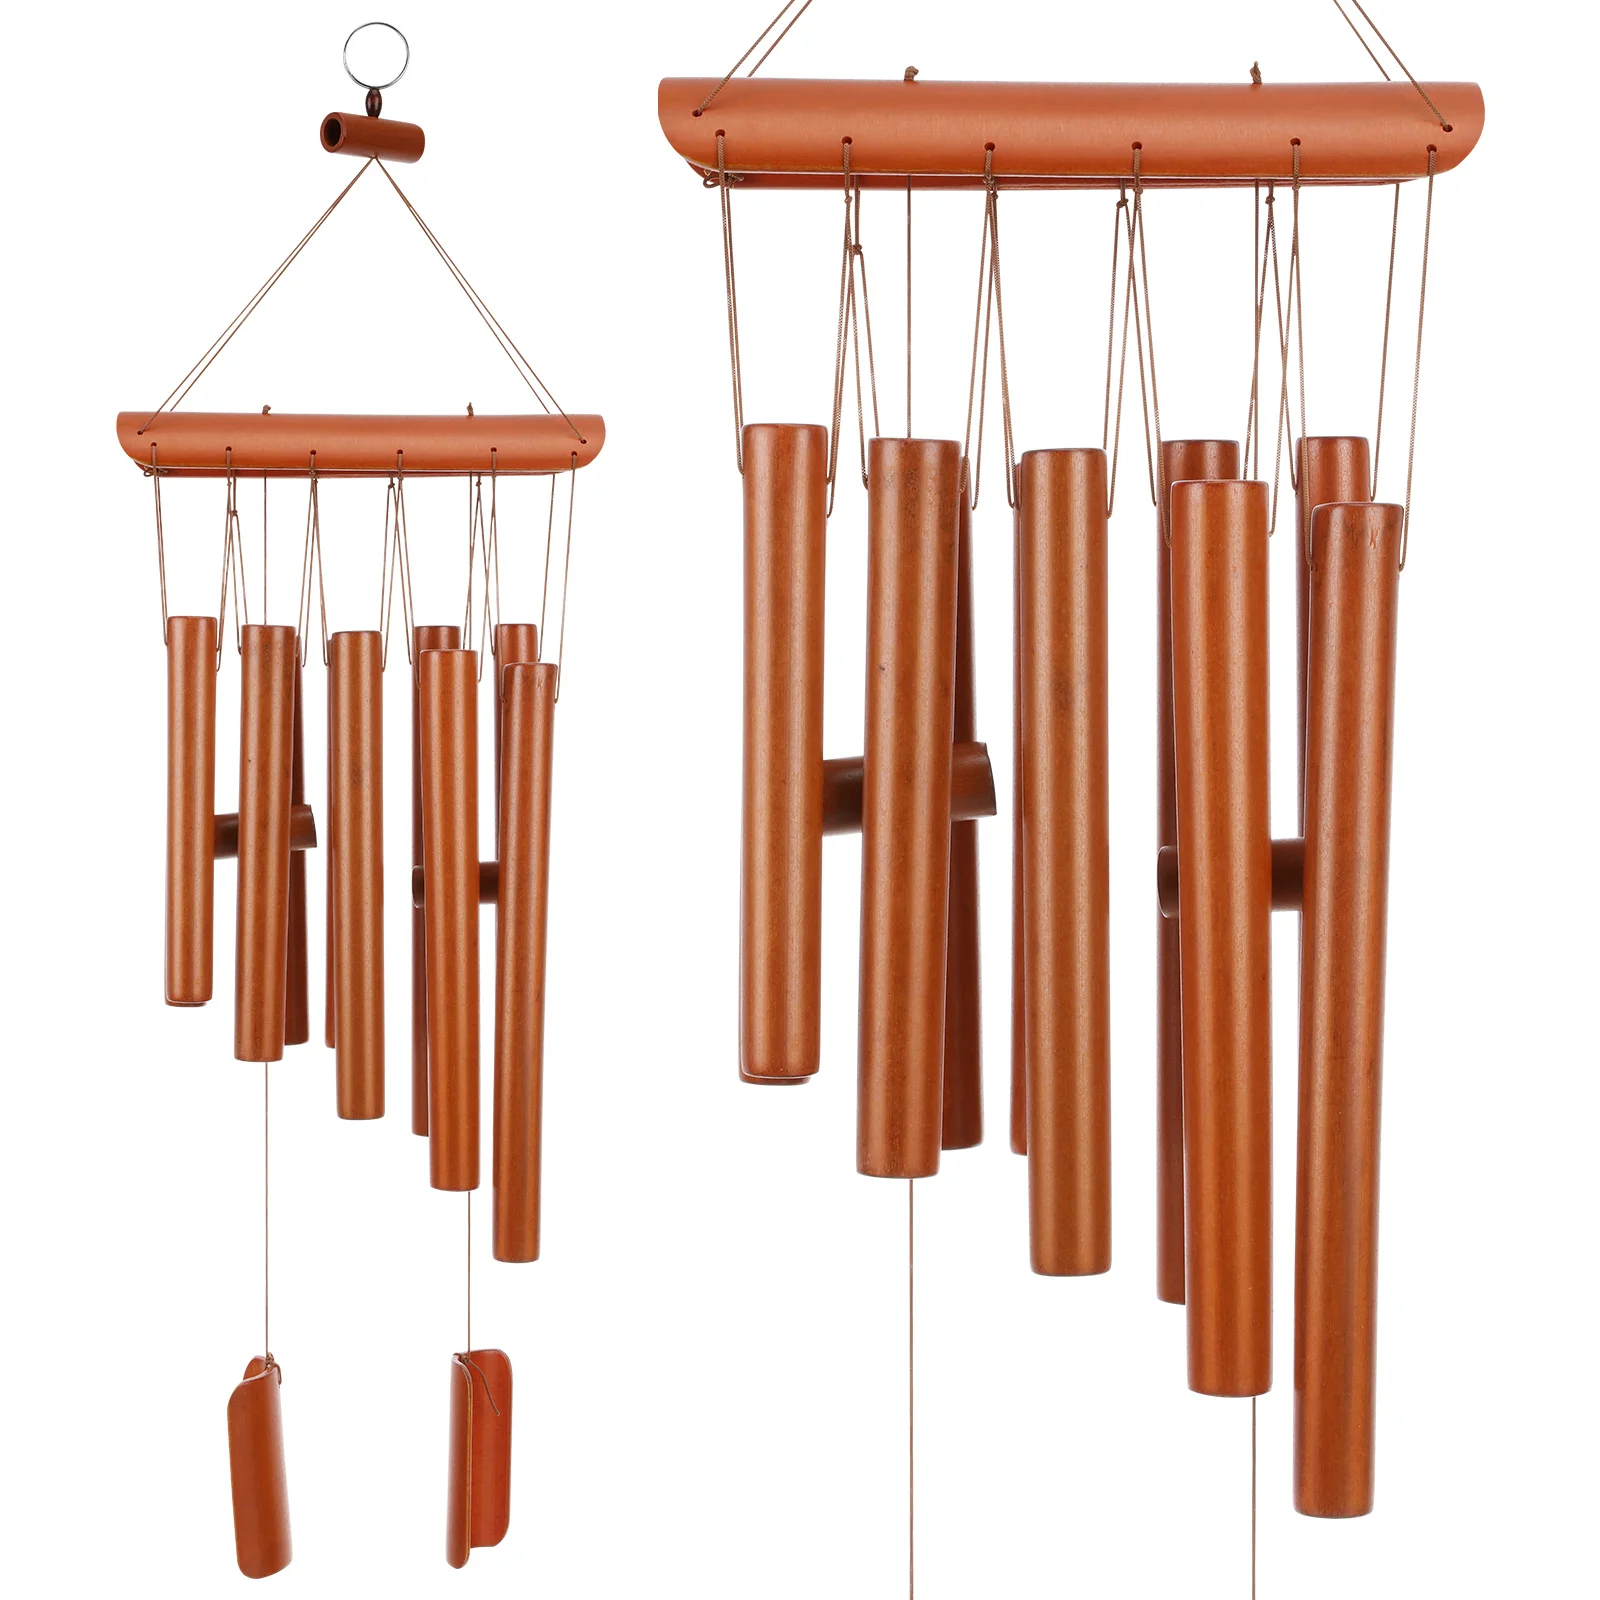 

Wind Chimes Wooden Tube Wind Chime Outdoor Deep Tone Chimes Memorial Wind Chimes For Patio Garden Home Porch Backyard